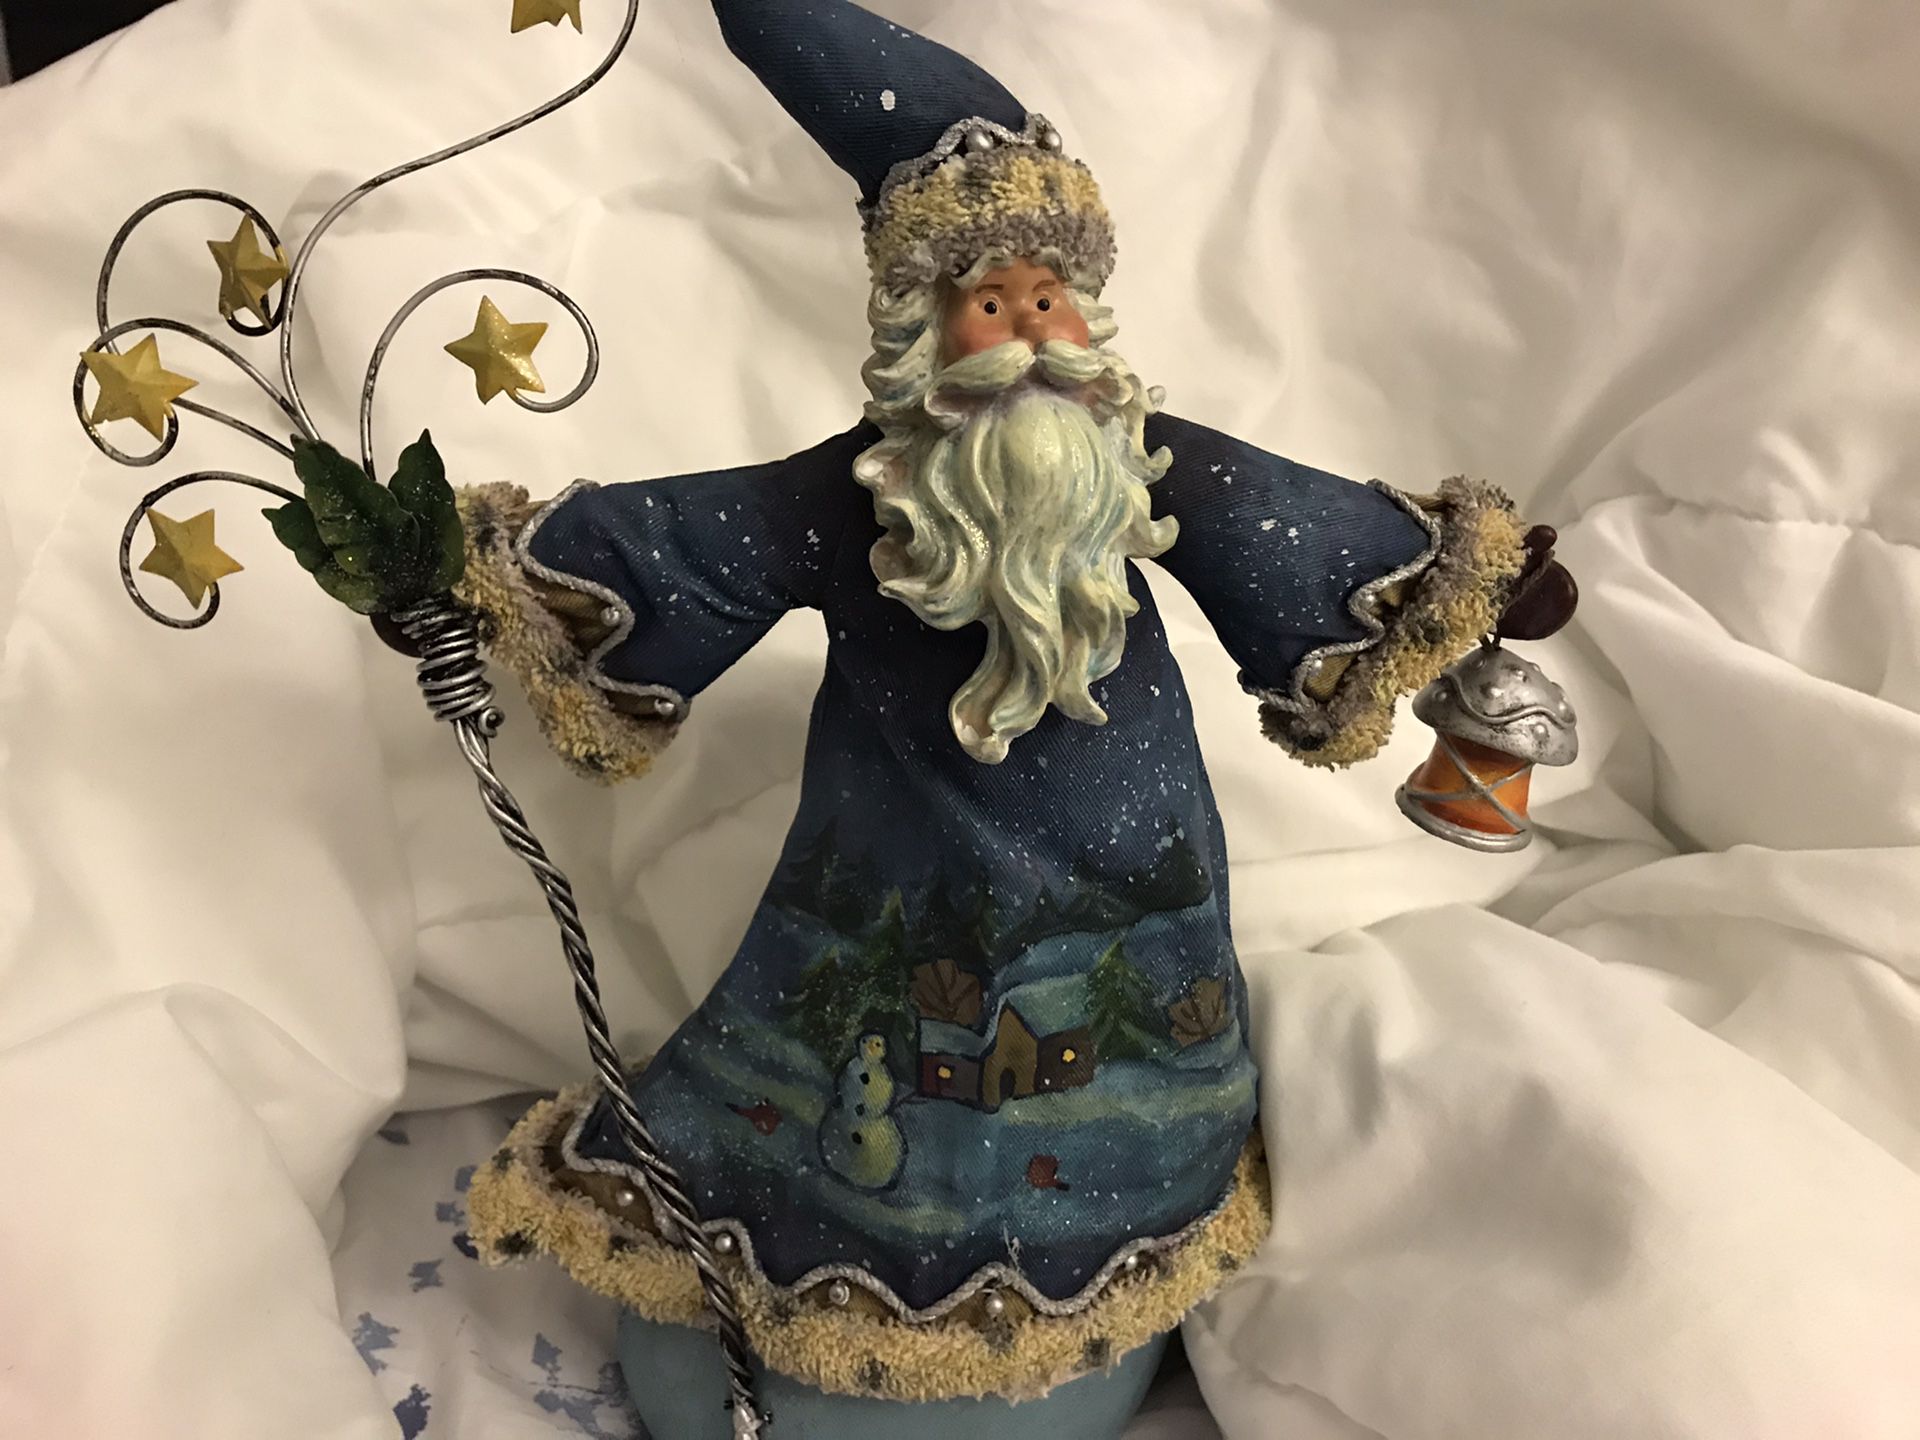 Beautiful Old Saint Nick with hand painted outfit